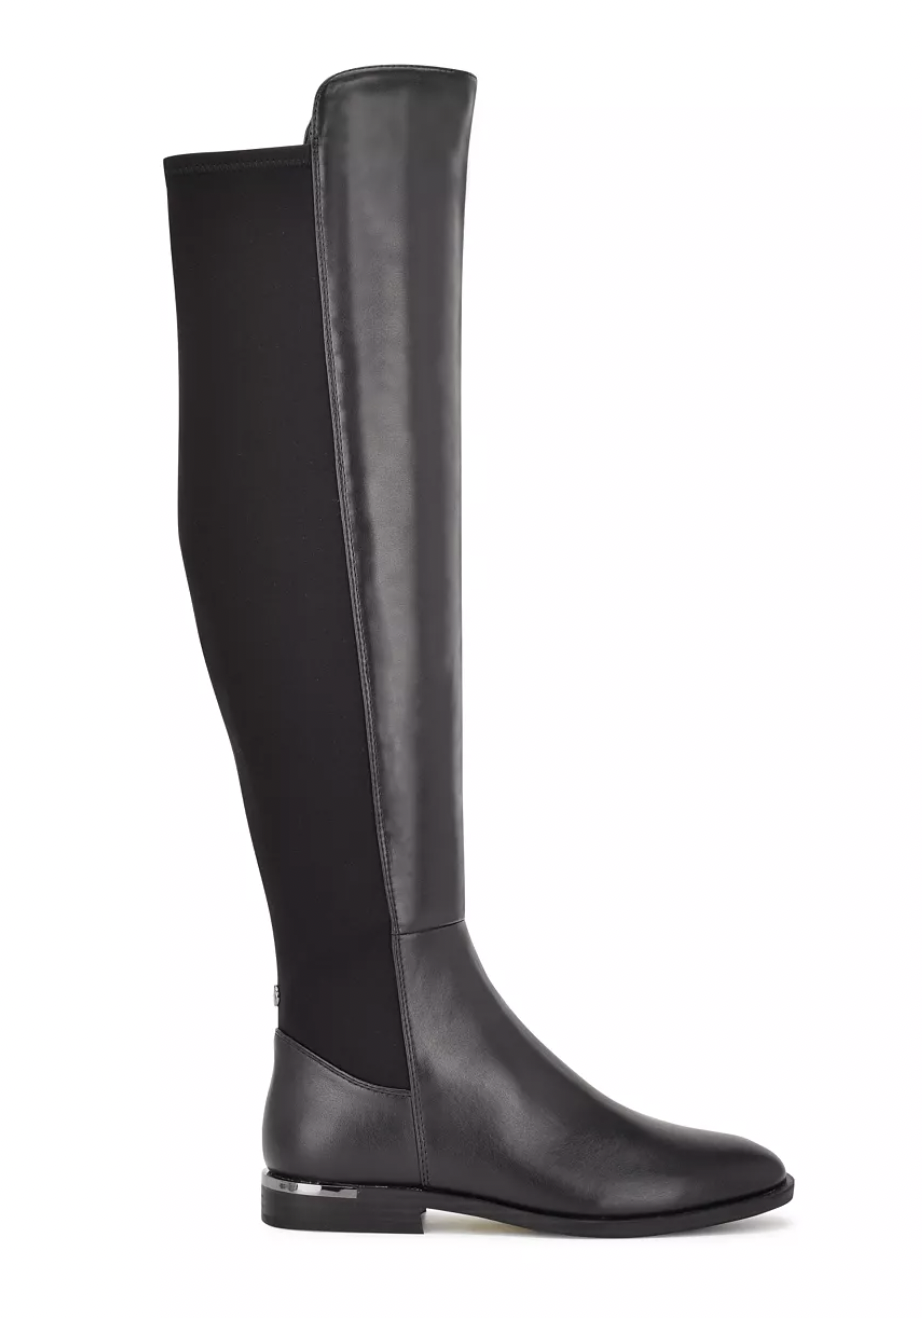 NINE WEST Allair Wide Calf Over The Knee Boots